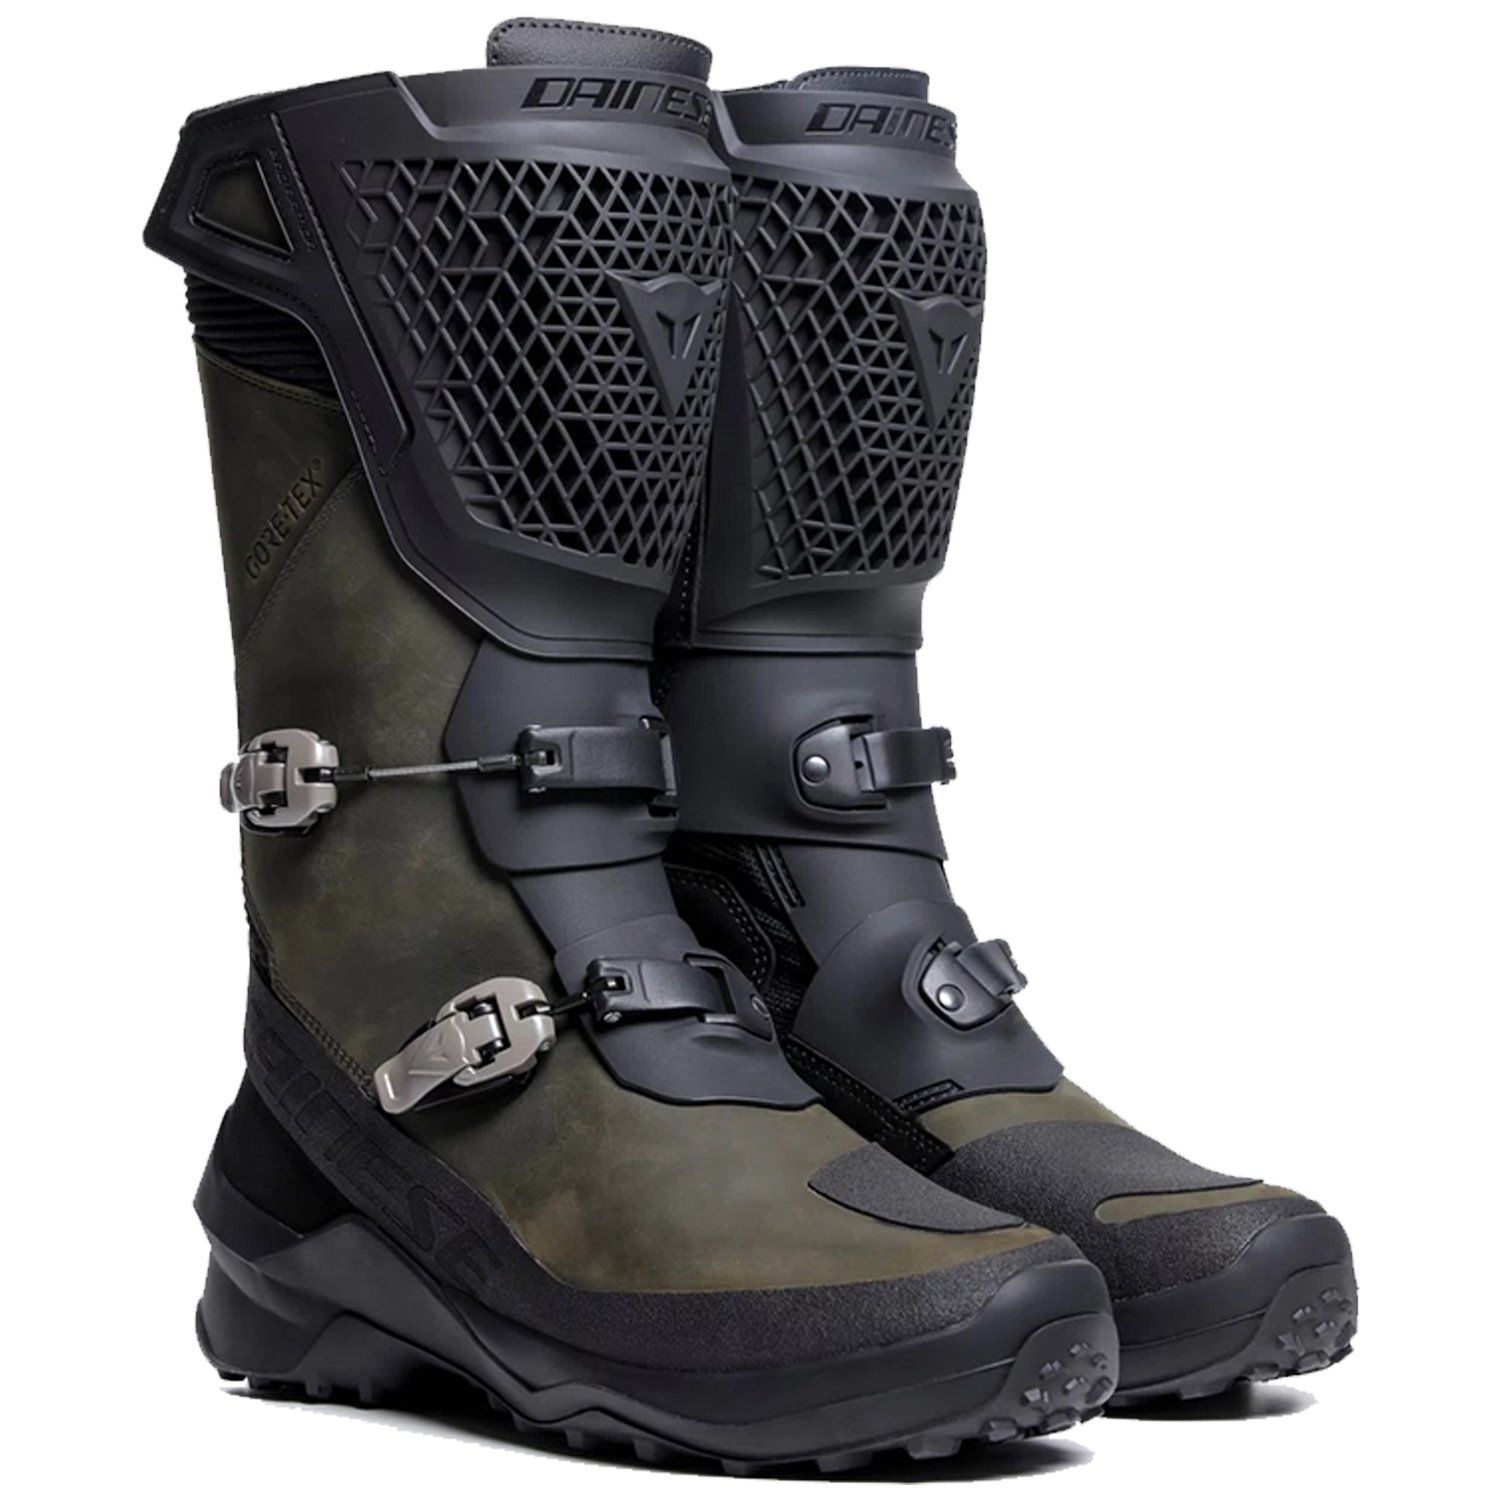 Image of Dainese Seeker Gore-Tex Boots Black Army Green Size 45 ID 8051019544537